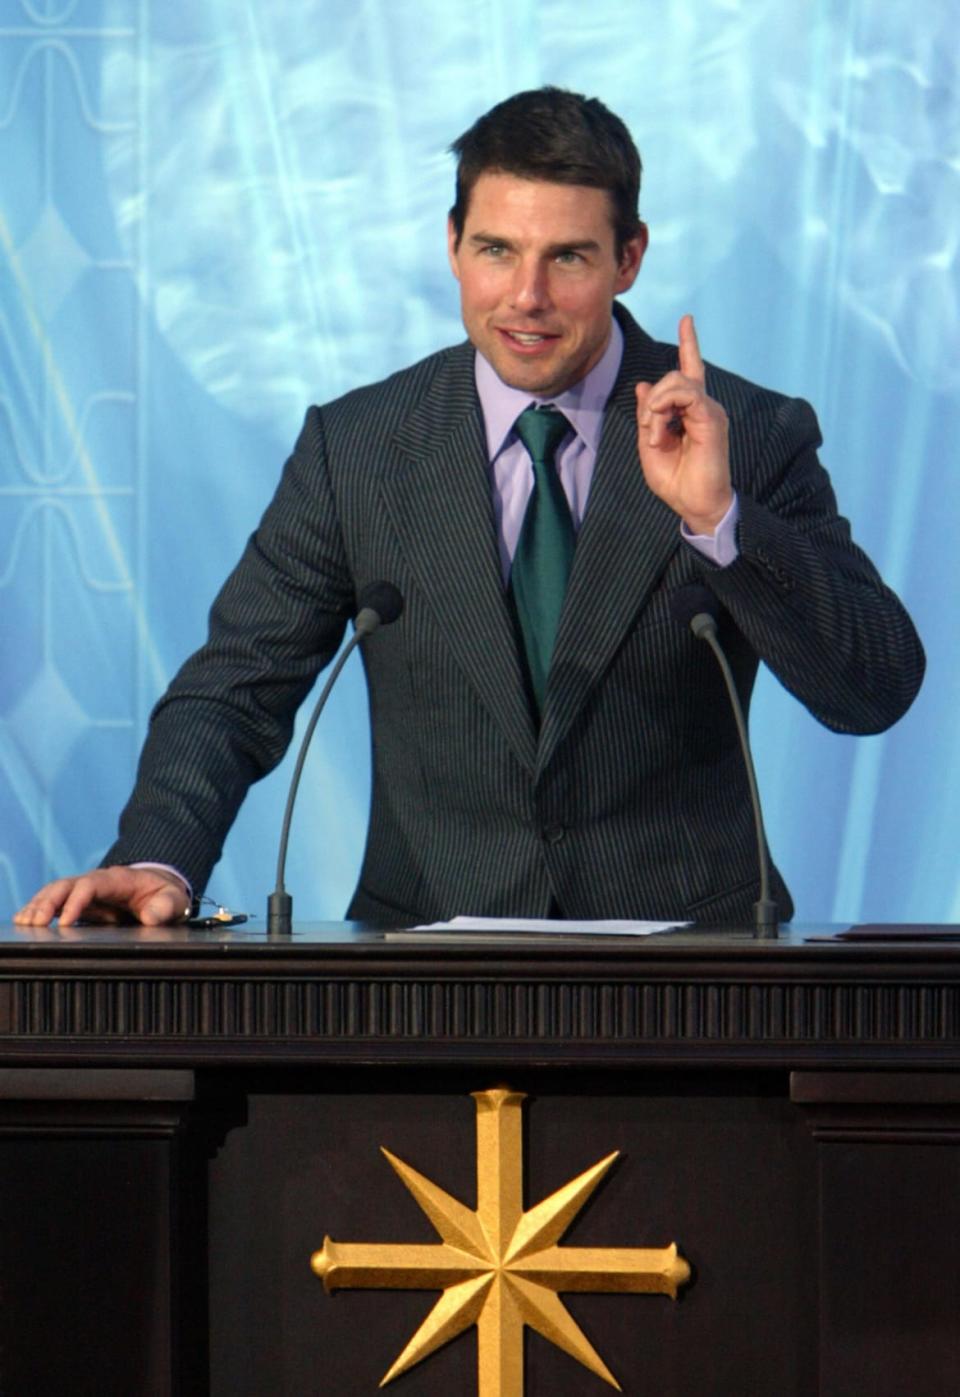 <div class="inline-image__caption"><p>Tom Cruise speaks during the inauguration of the Church of Scientology in Madrid, Spain, on Sept. 18, 2004. </p></div> <div class="inline-image__credit">Pierre-Philippe Marcou/AFP/Getty</div>